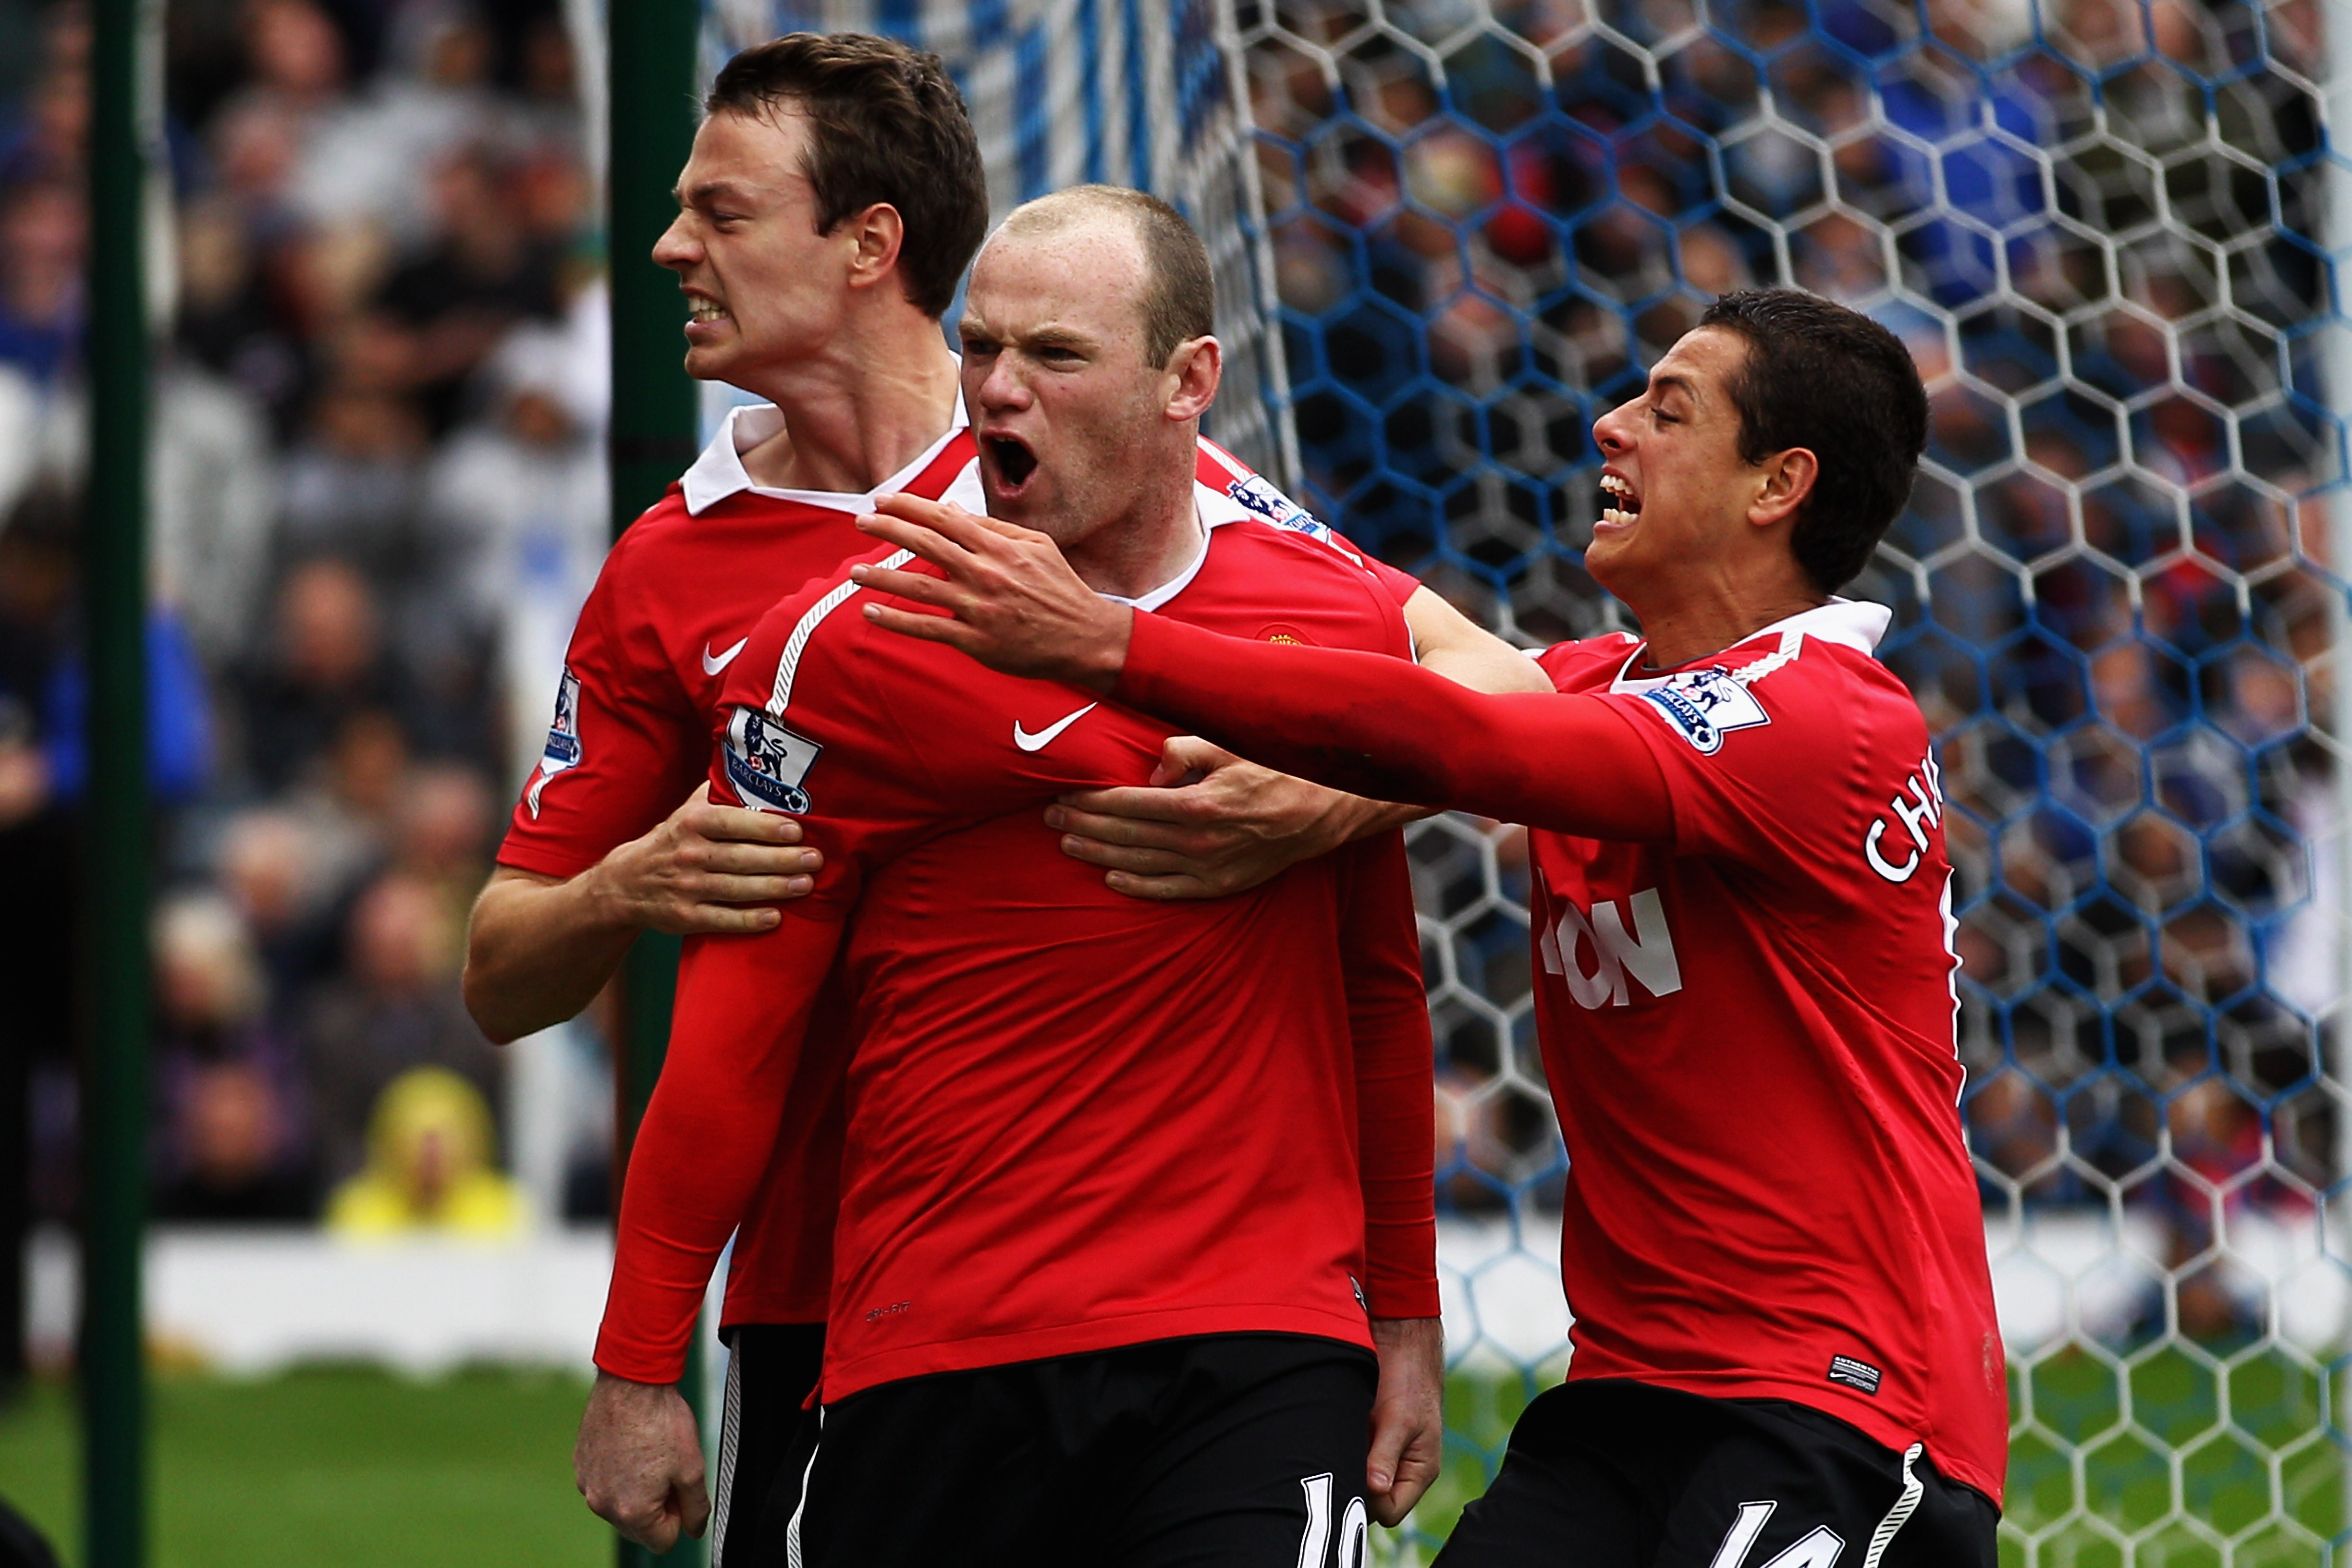 BLACKBURN, ENGLAND - MAY 14:  Wayne Rooney of Manchester United celebrates with team mates after scoring a penalty during the Barclays Premier League match between Blackburn Rovers and Manchester United at Ewood park on May 14, 2011 in Blackburn, England.